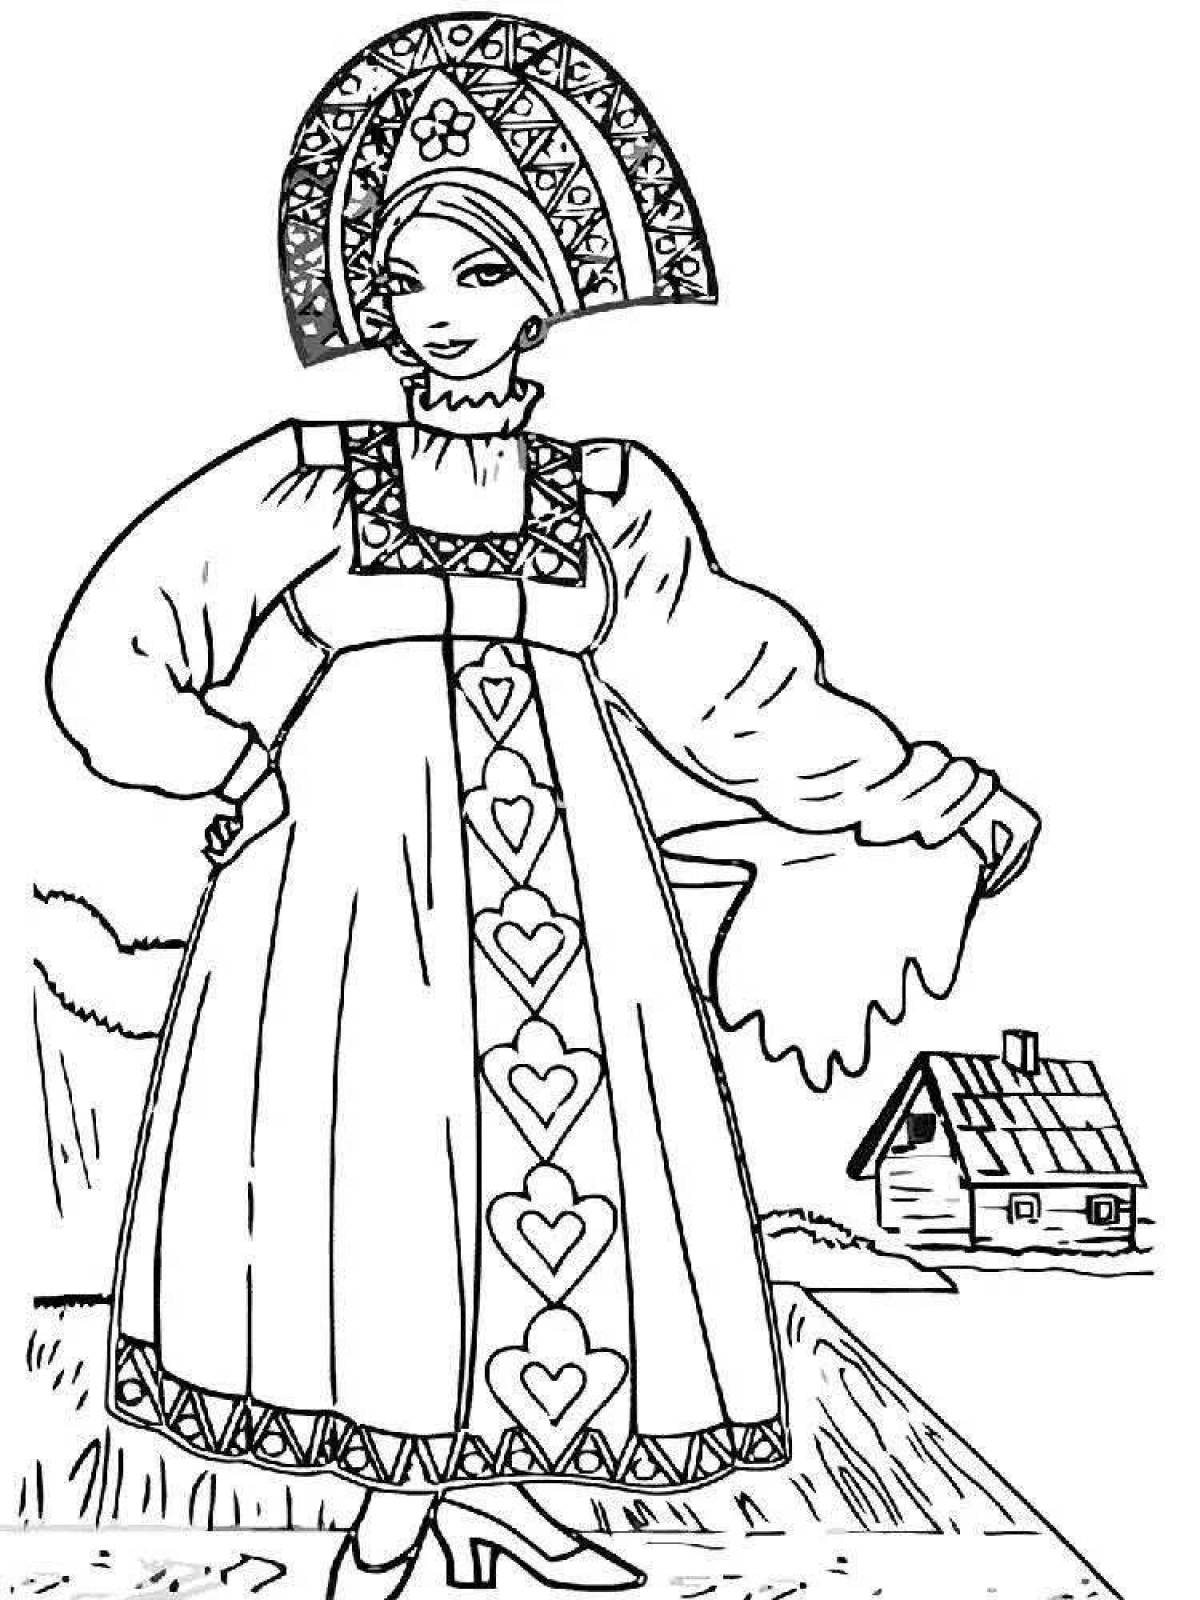 Coloring page intricate folk costume